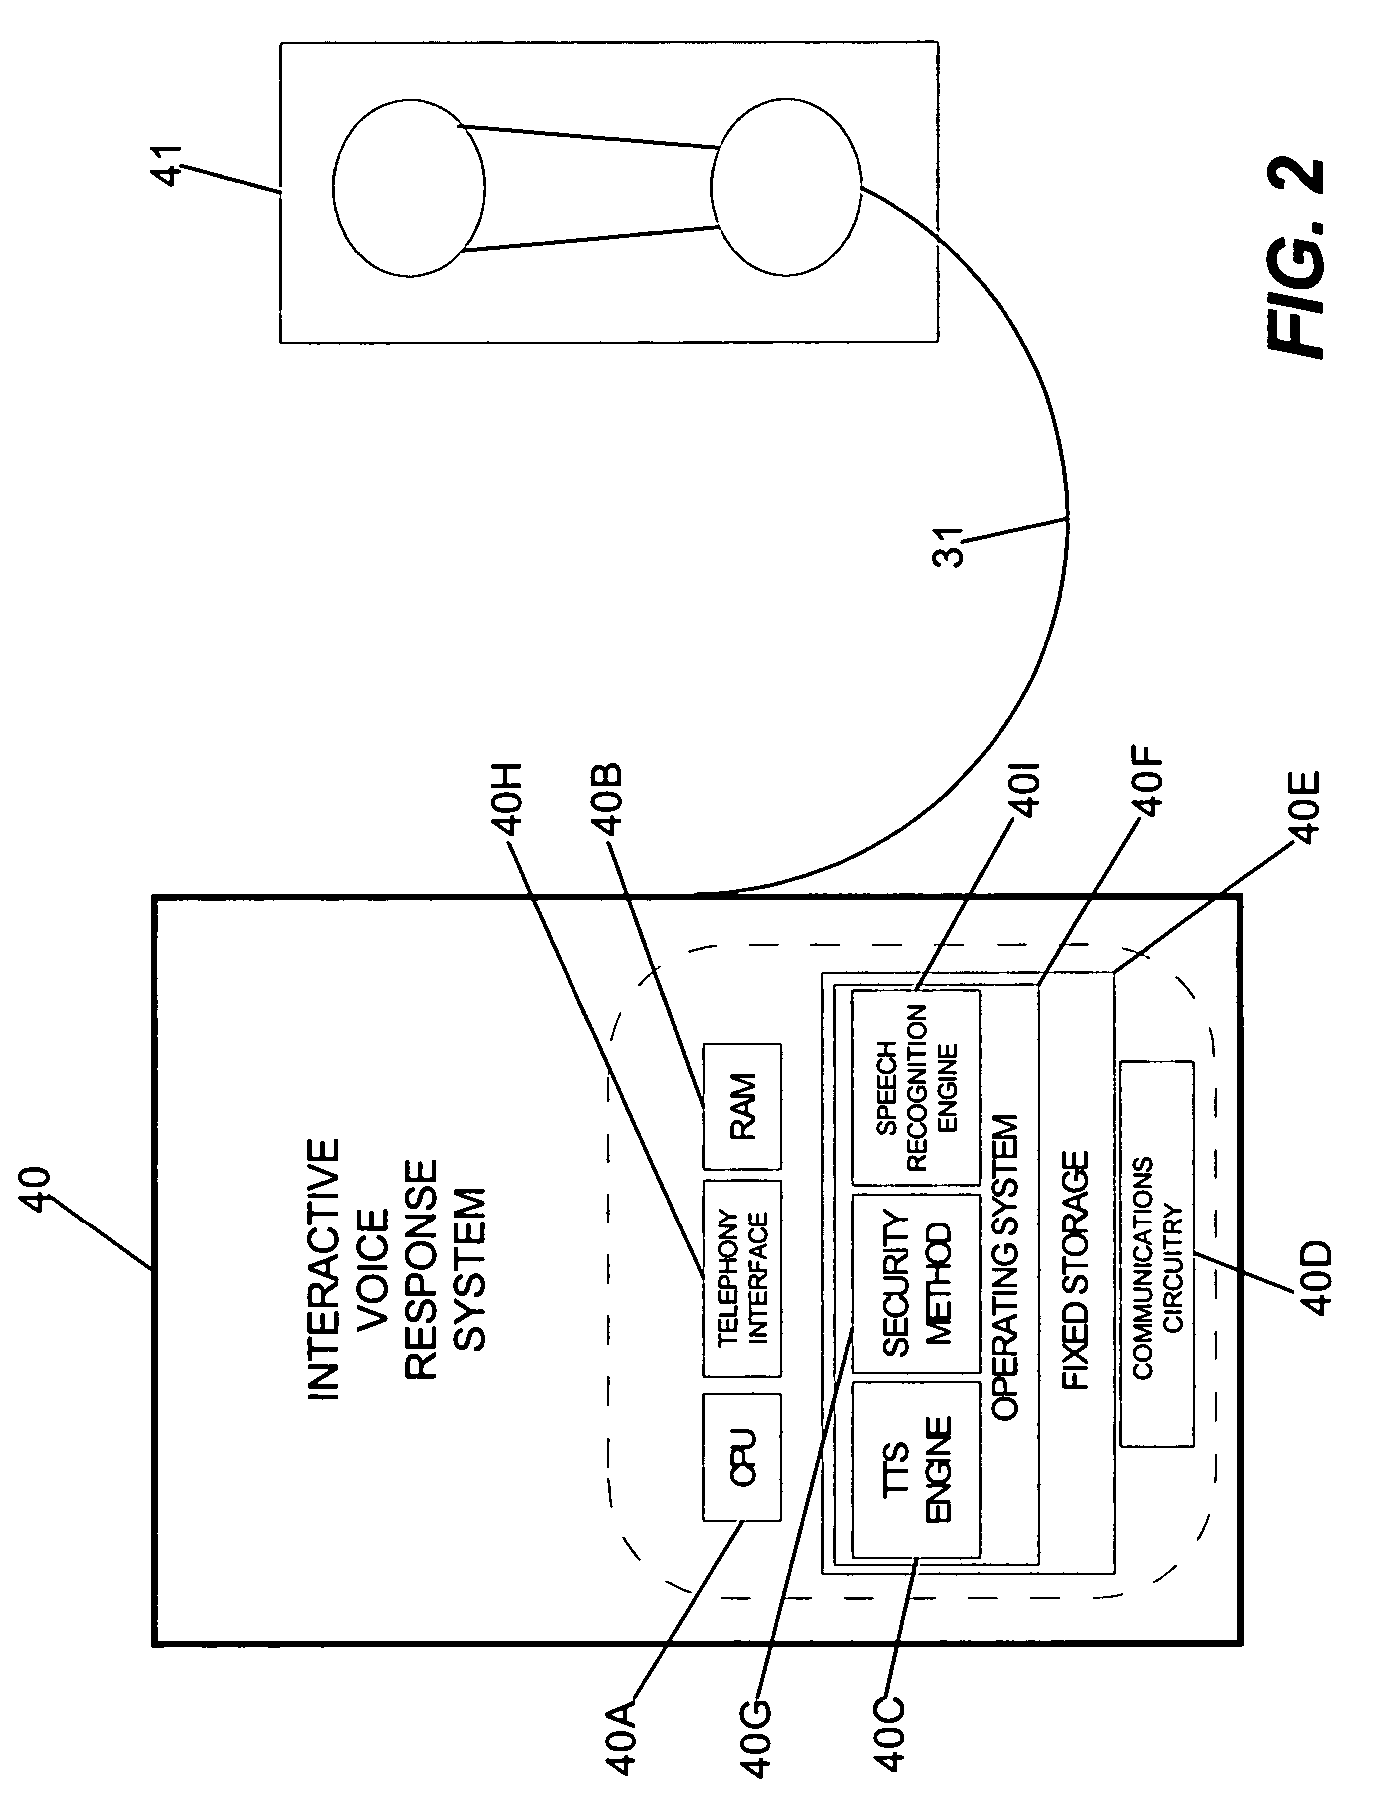 Secure entry of a user-identifier in a publicly positioned device